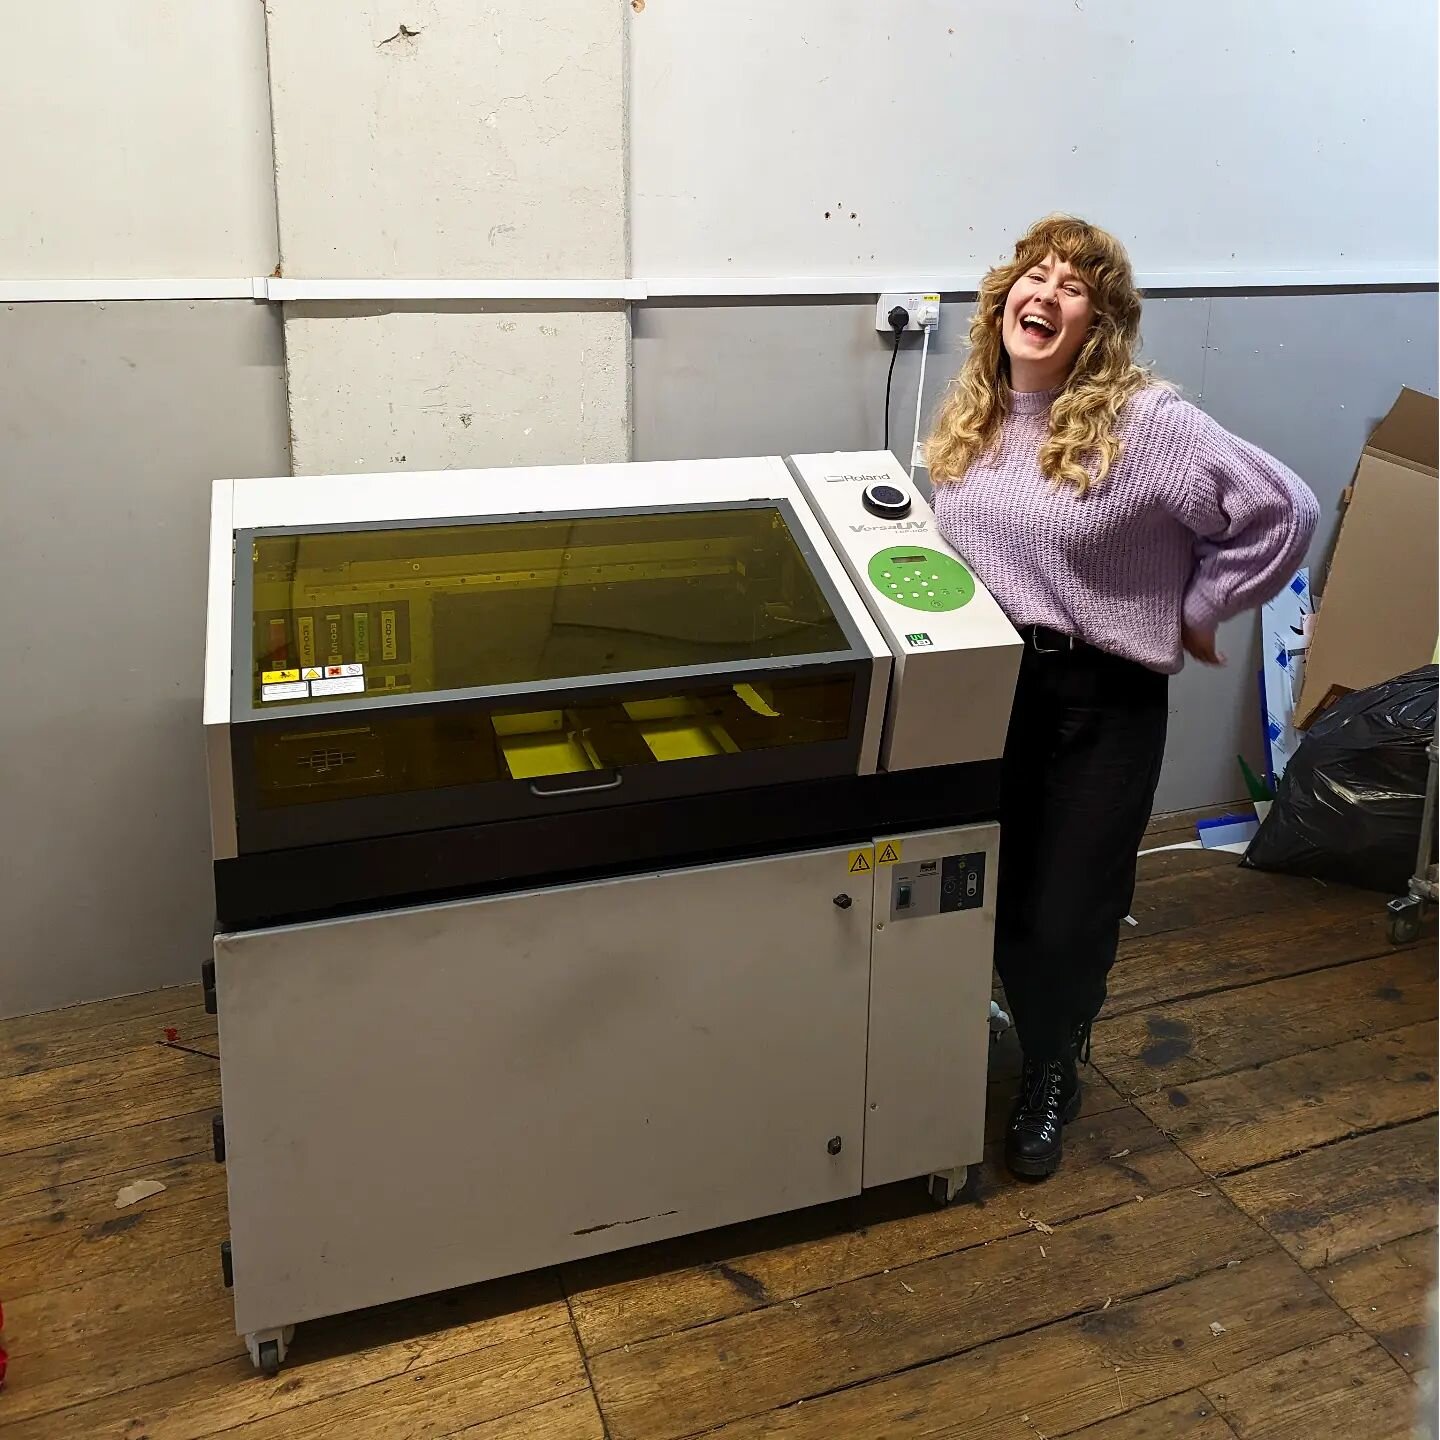 As you might have seen on my stories over the weekend, there's a new bit of kit at Slice! 🎉
This beast is a UV printer, which means I'll be able to print onto wood, acrylic, and most other flat materials. So excited to start offering this as a servi